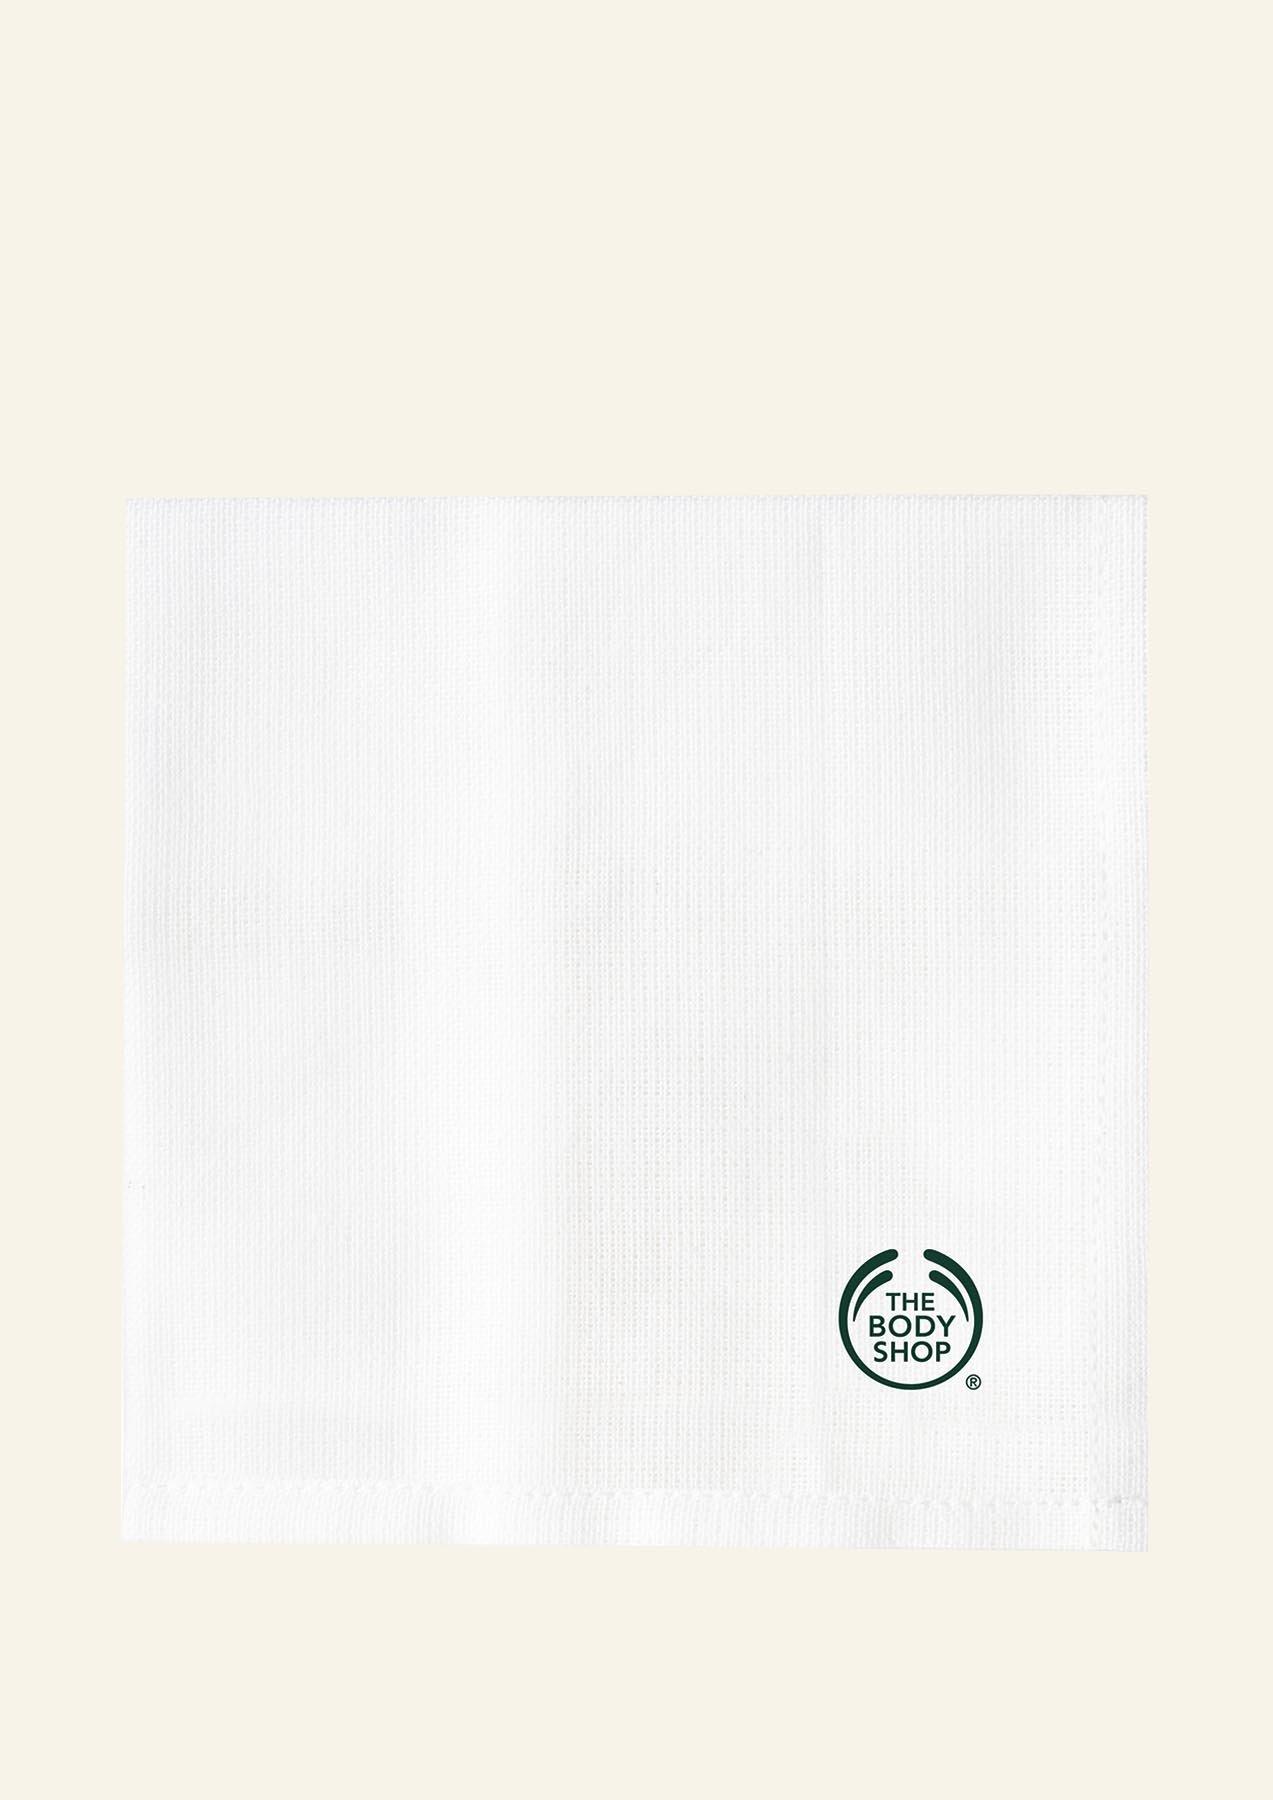 Muslin Cleansing Cloth - The Body Shop Muslin Cleansing Cloth